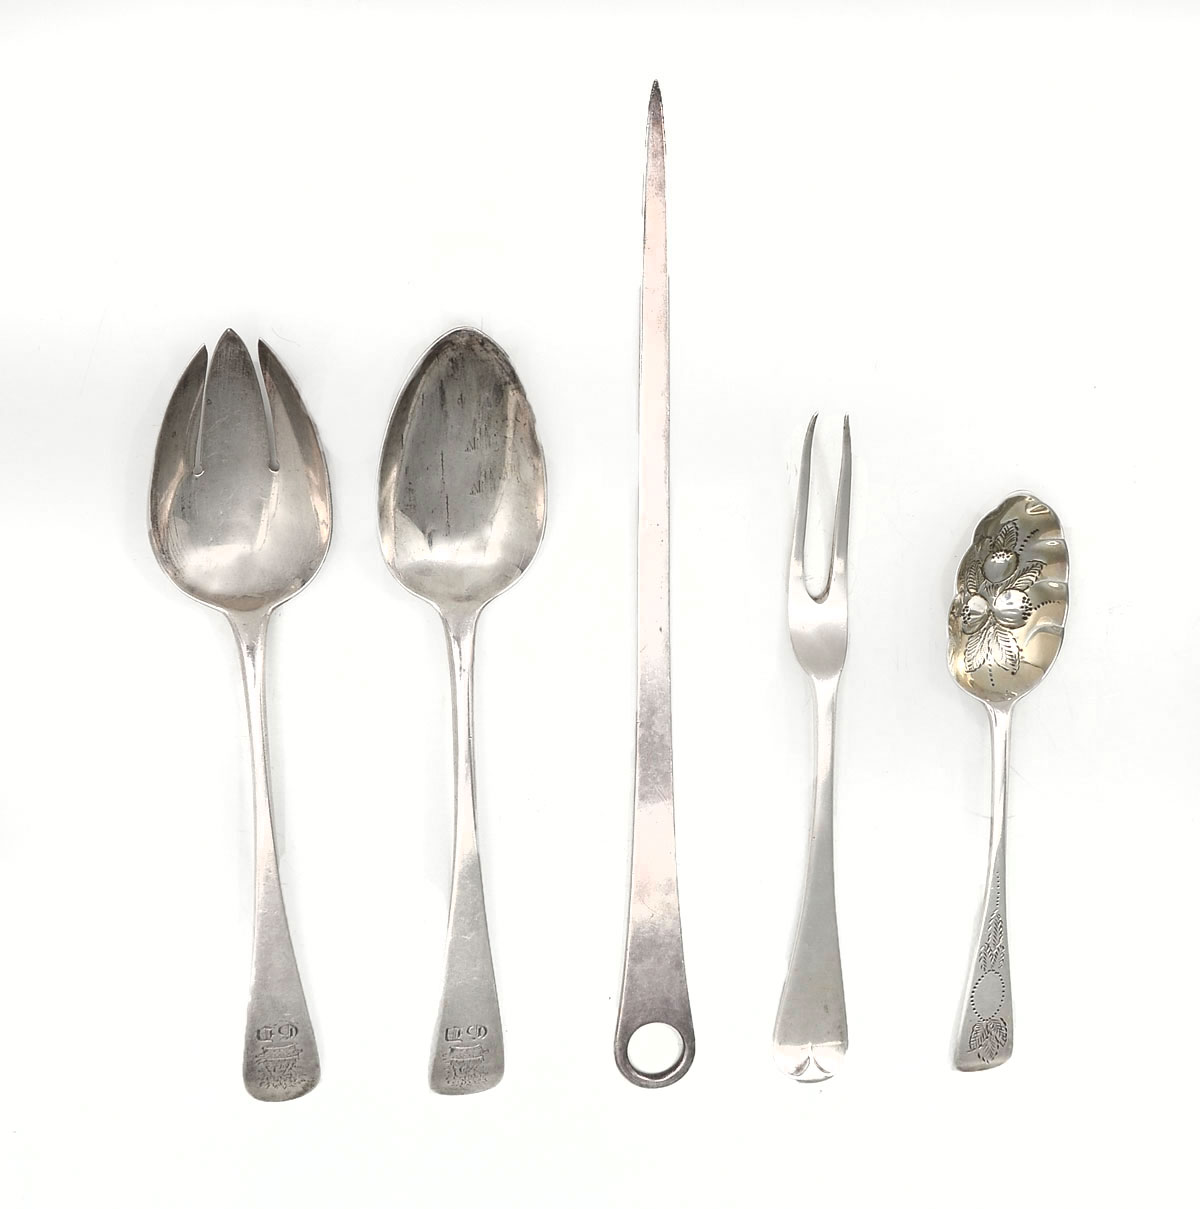 5 PC. ENGLISH STERLING SILVER SERVING